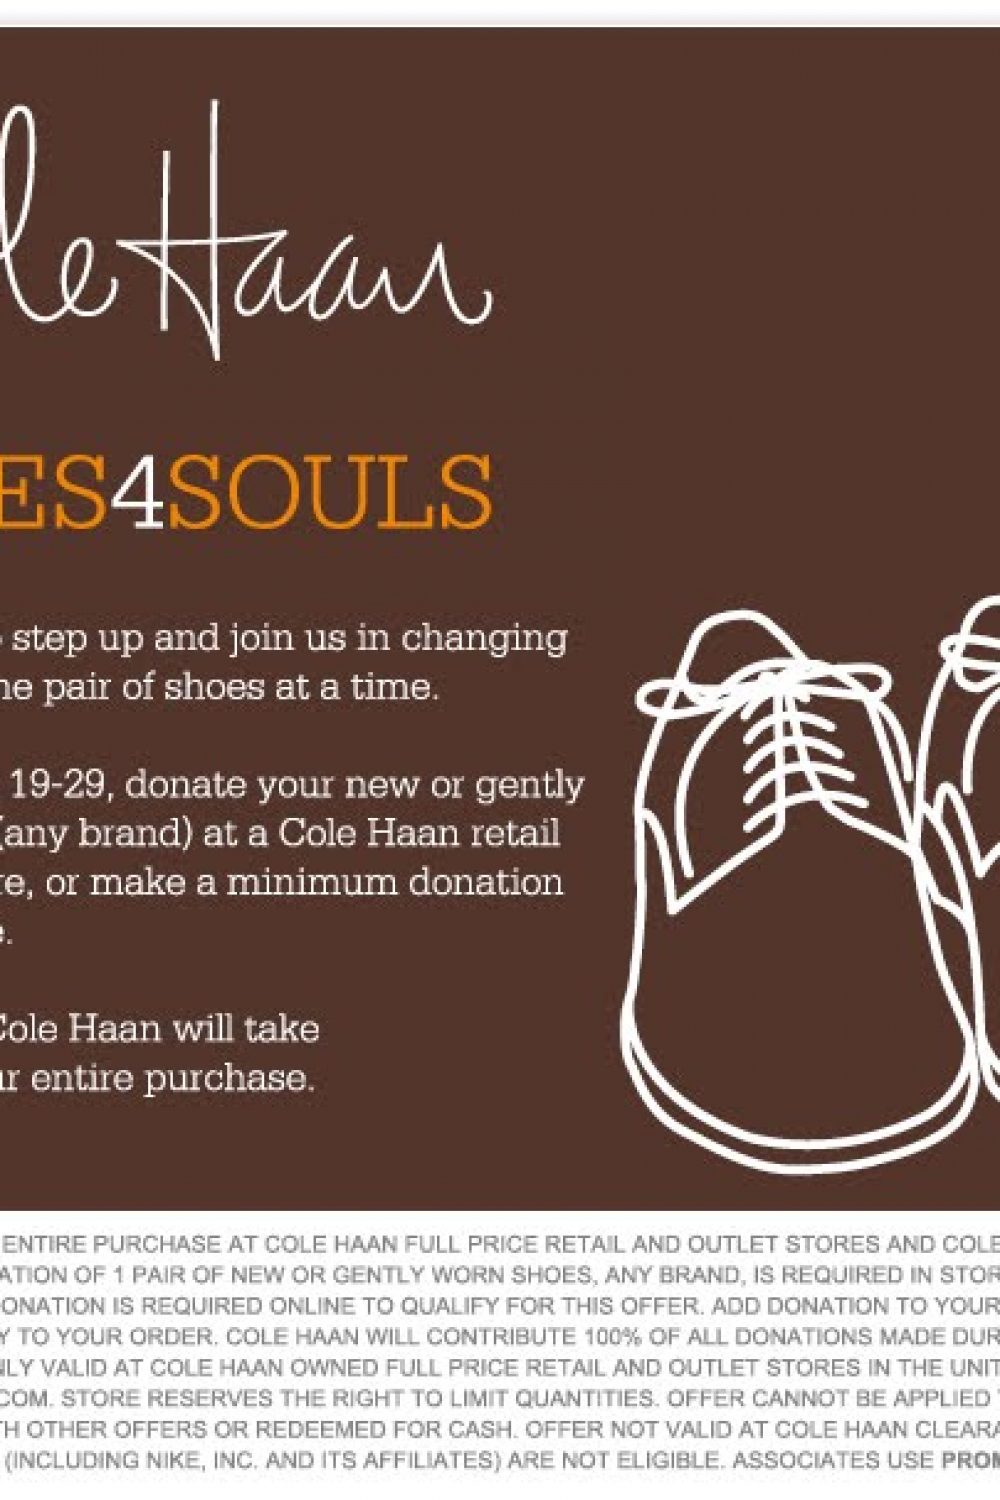 Soles4Souls & Cole Haan Are Changing the World One Pair of Shoes at a Time